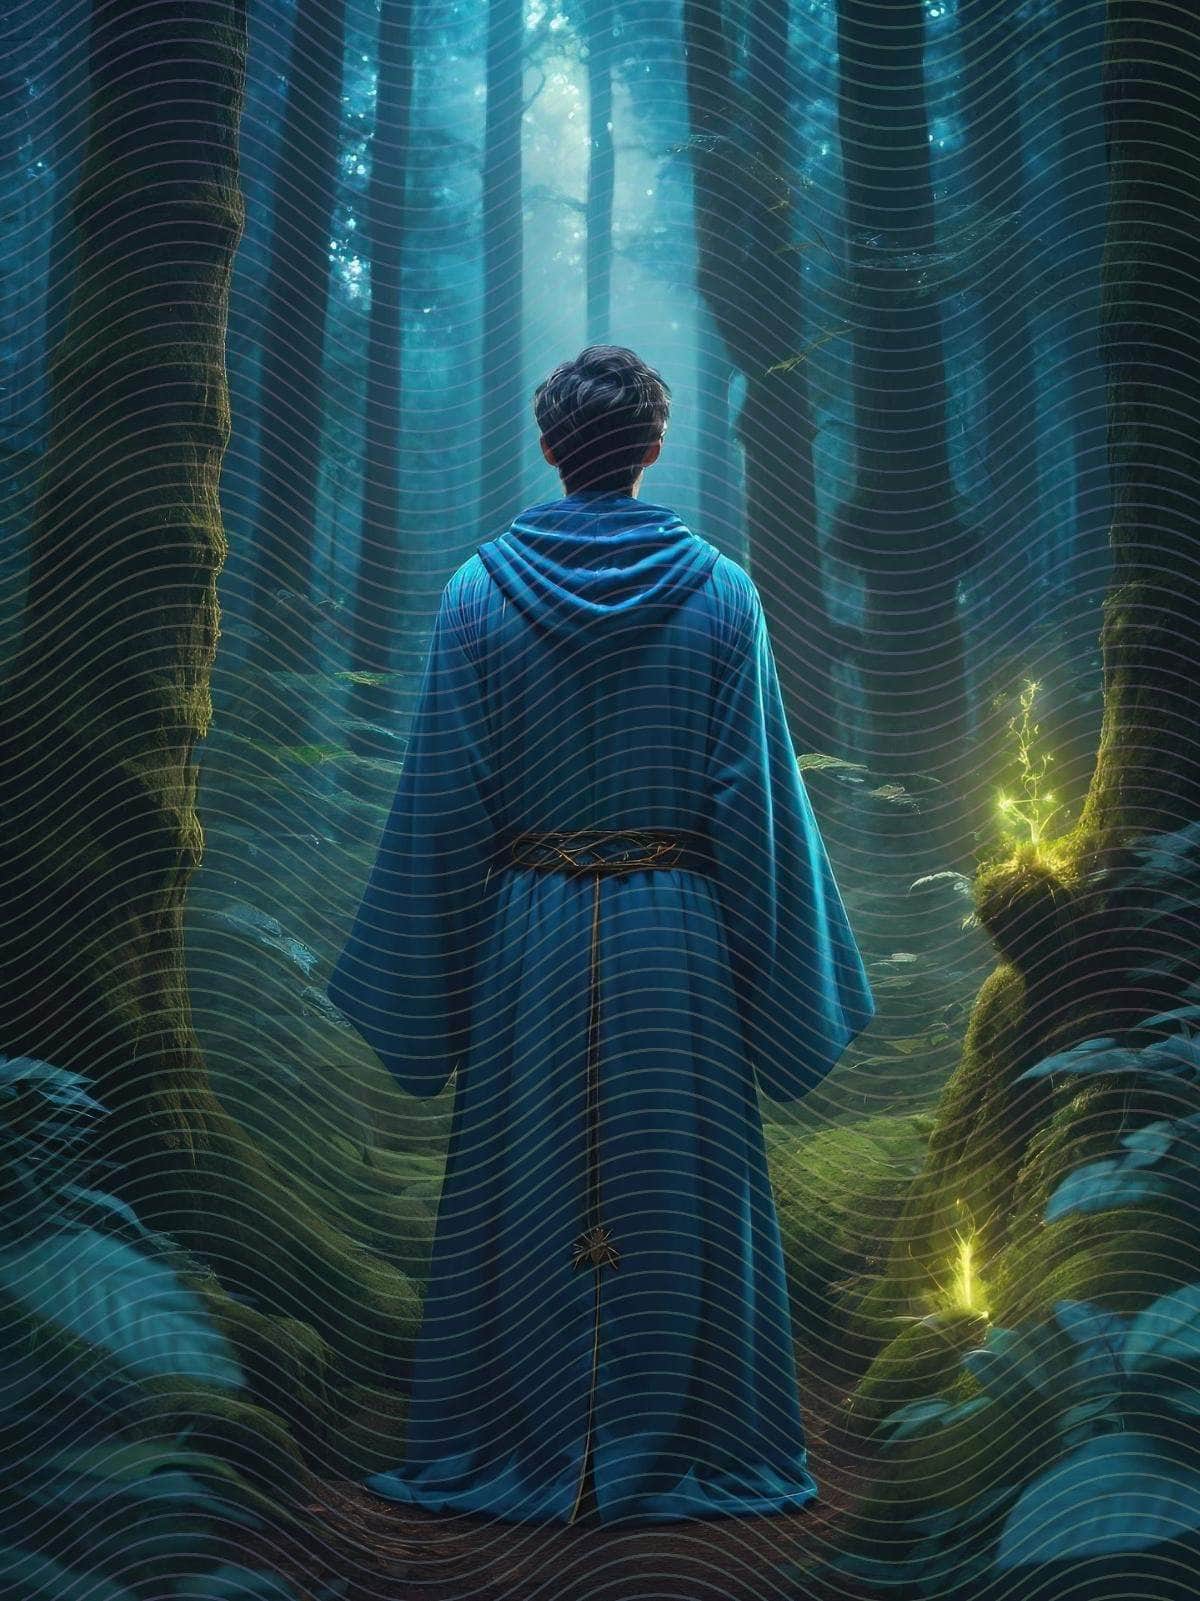 A Person in Blue Robe Standing in a Forest